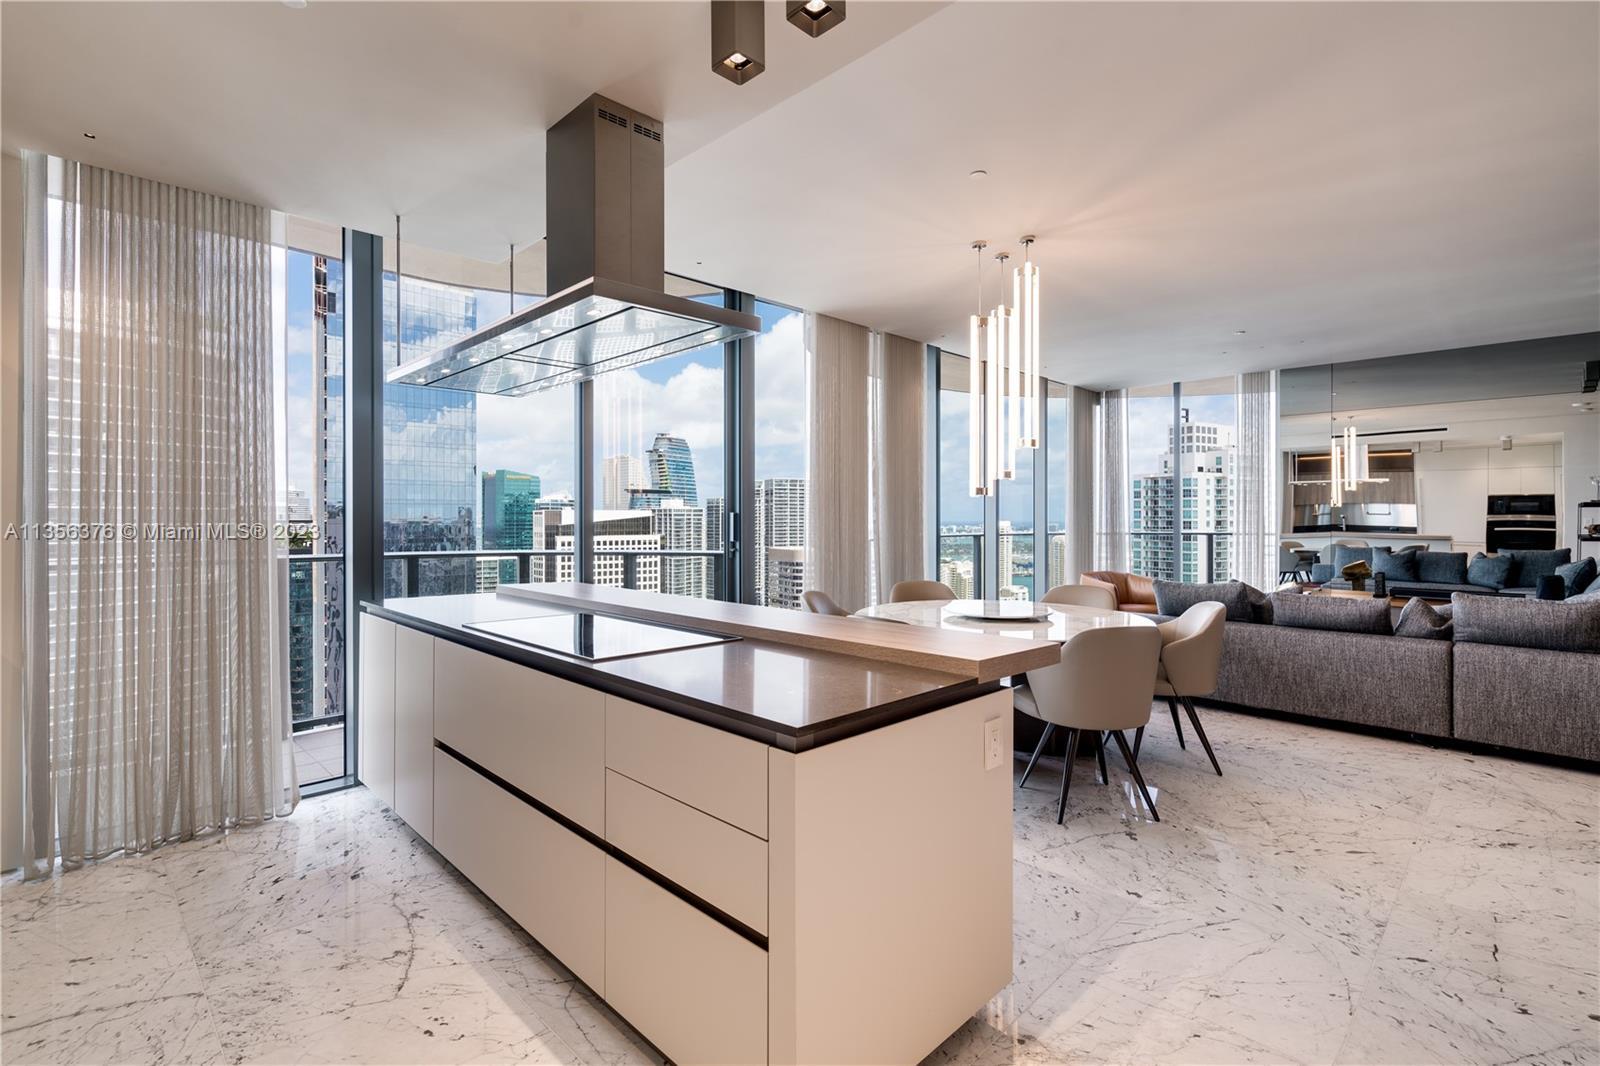 Live in ultimate luxury at this immaculate PH condo at the prestigious Brickell Flatiron. Fully cust